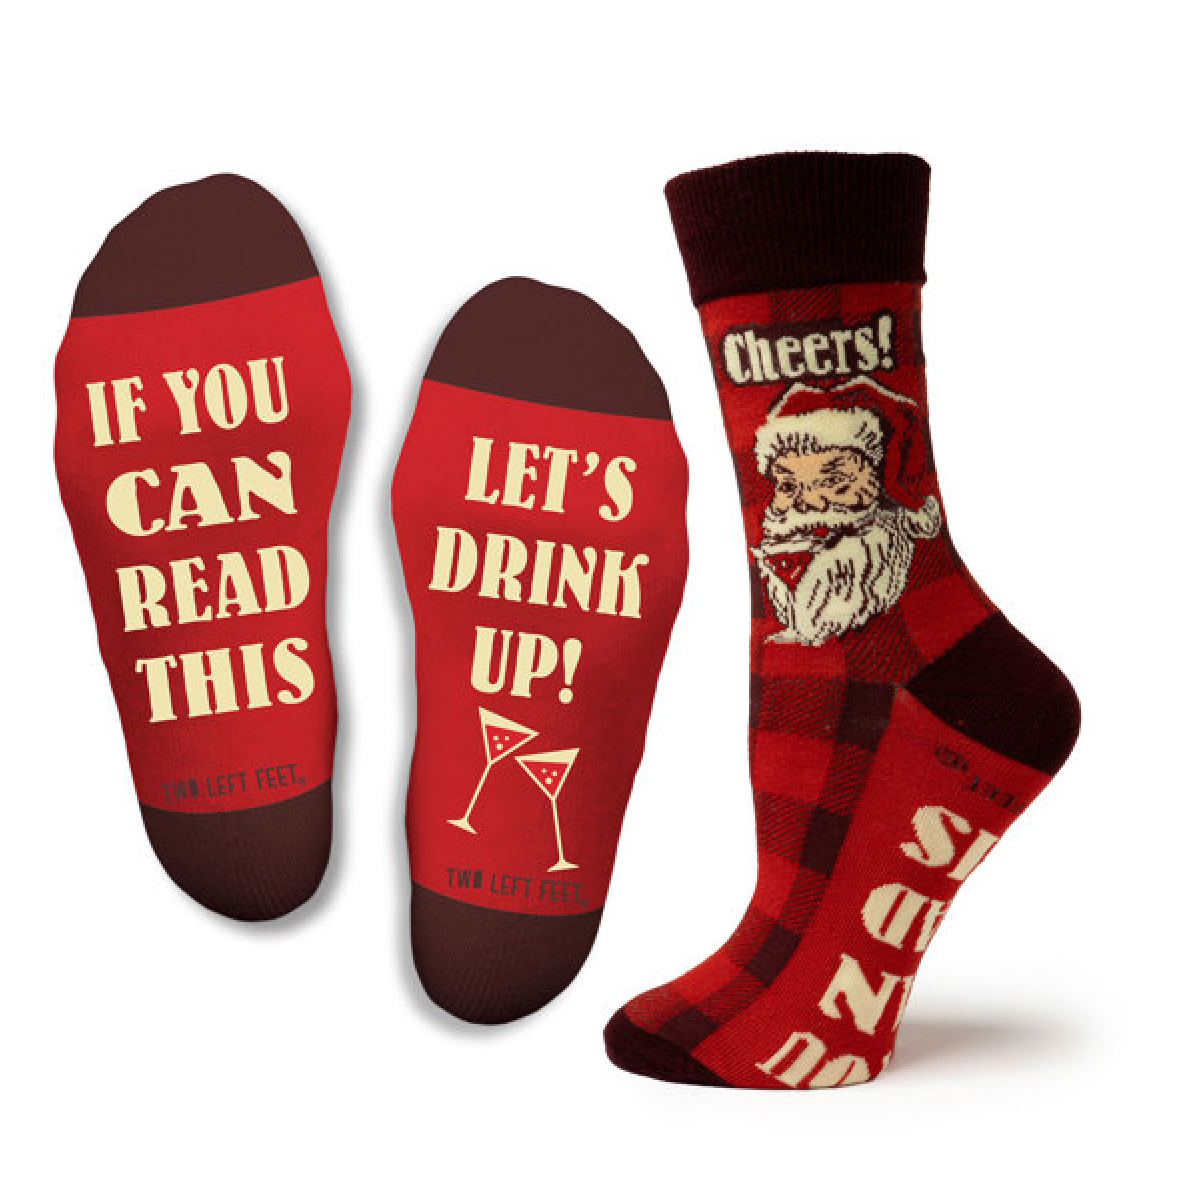 Two Left Feet Women's If You Can Read This Socks Pass The Popcorn